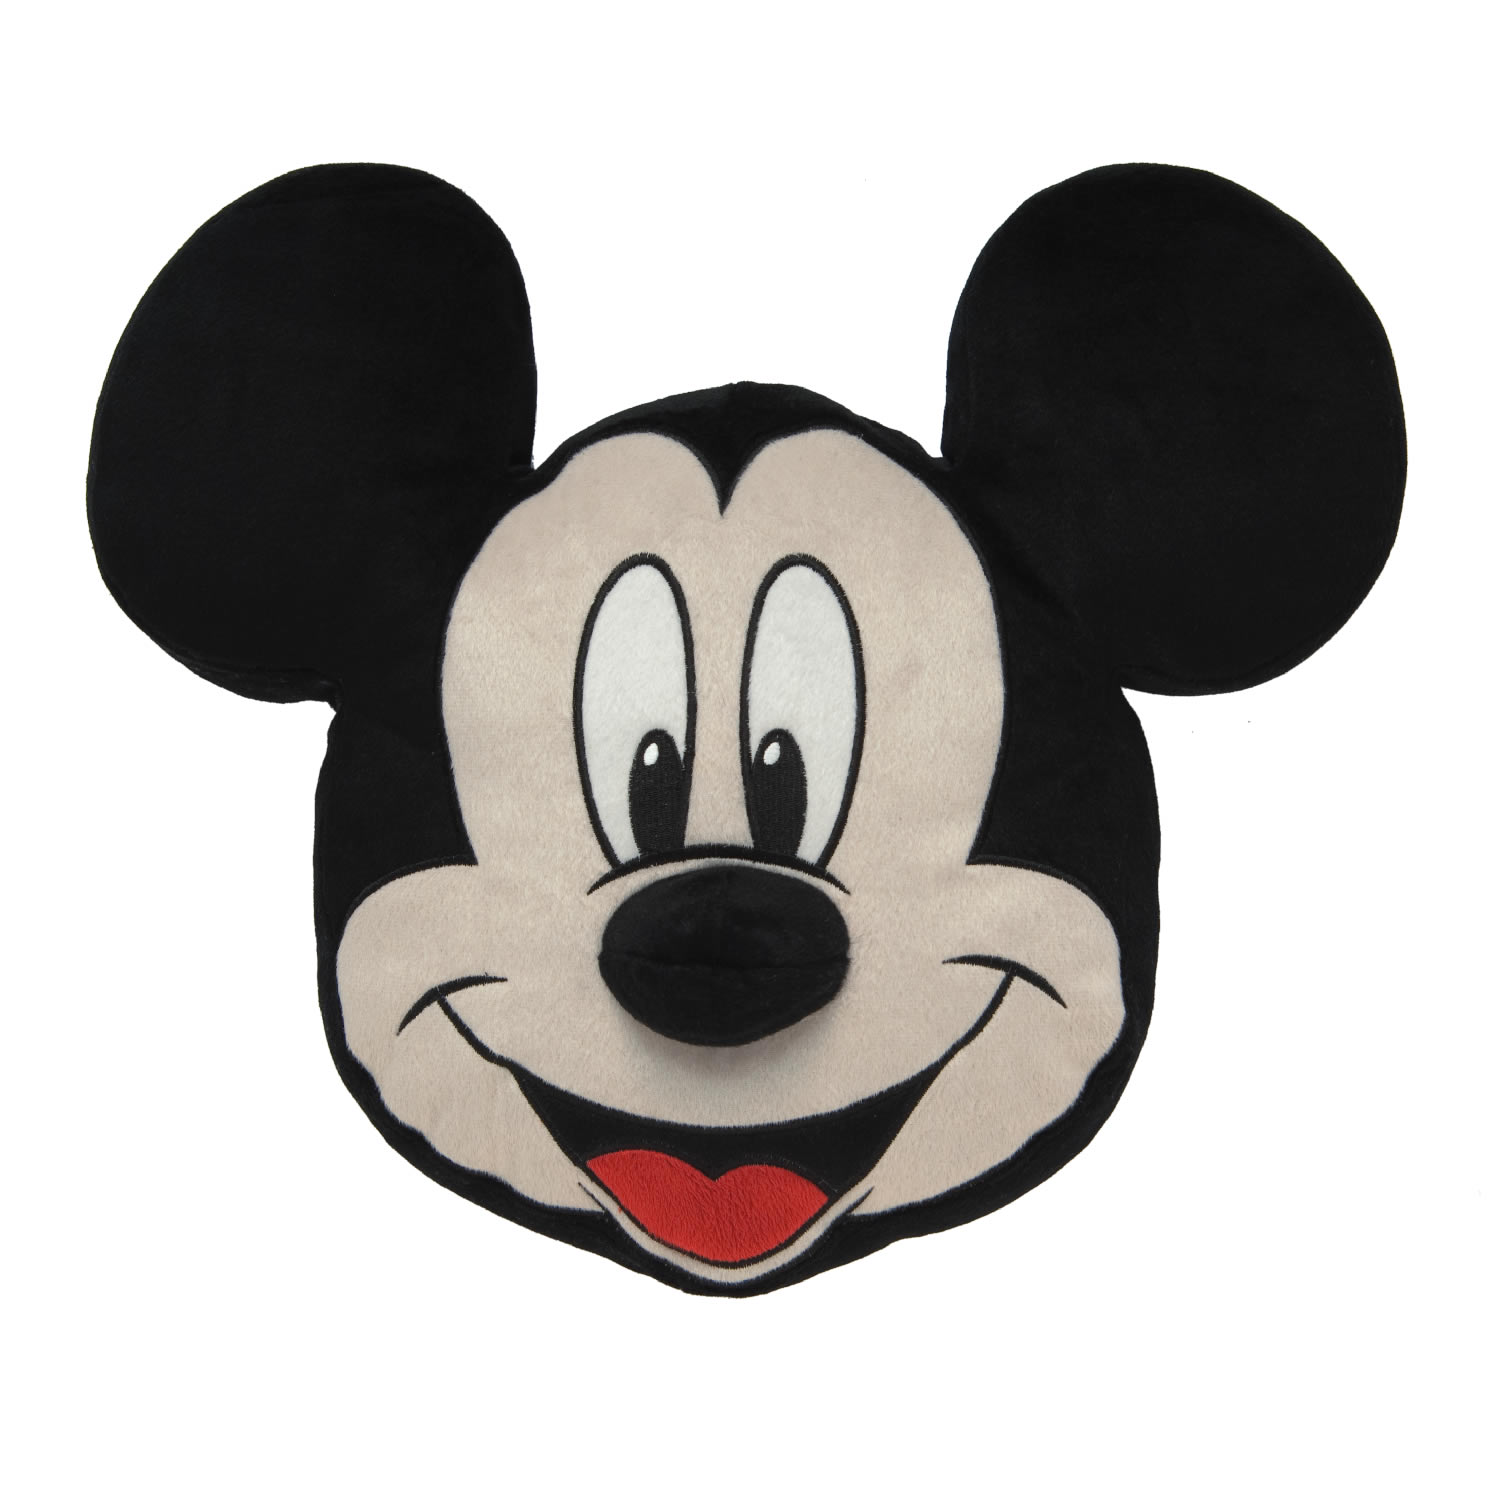 Mickey Mouse Face Clip Art - Free Clipart Images